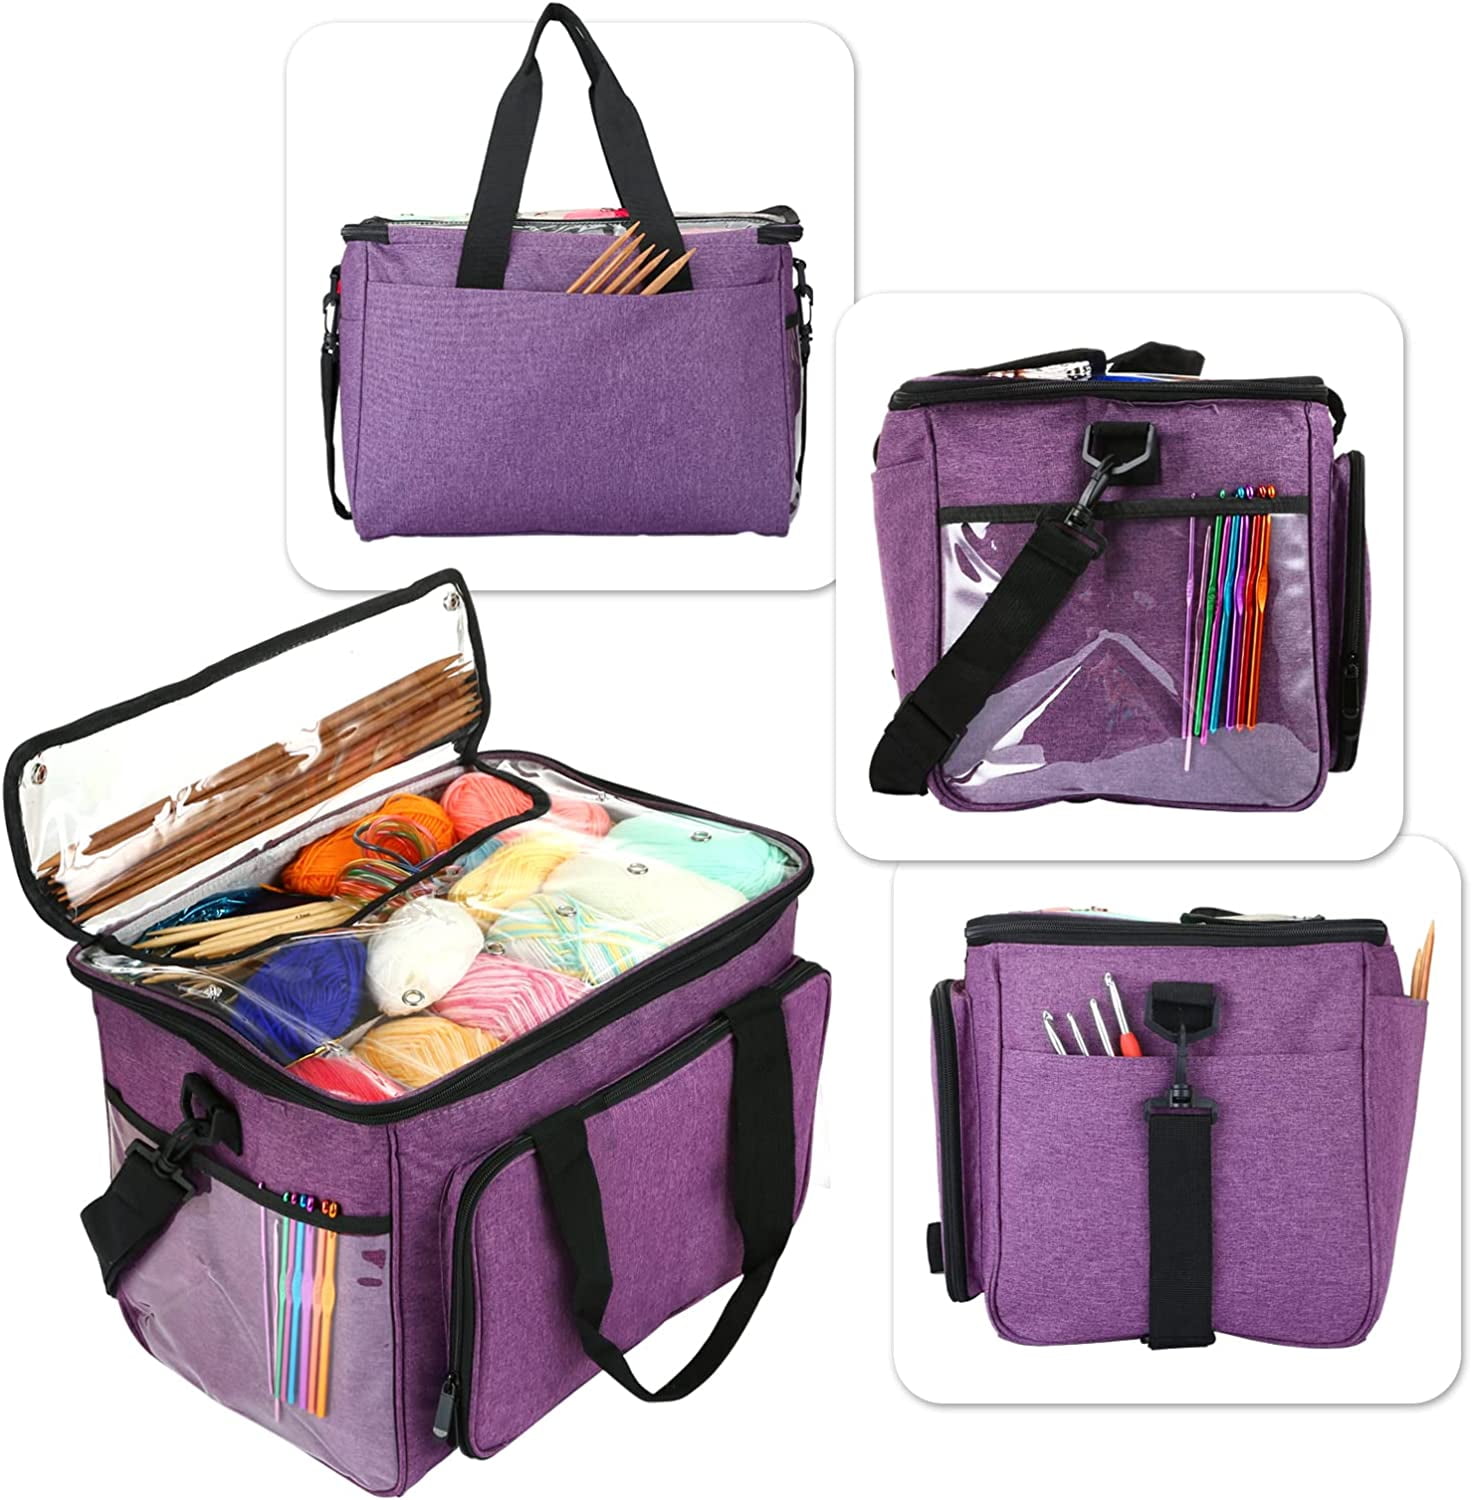 Purple Storage Tote Knitting Tote Bag Perfect Size Yarn Organizer Universal  Overlock Sewing Machine With Shoulder Strap And Sturdy From Lizhiibs,  $75.21